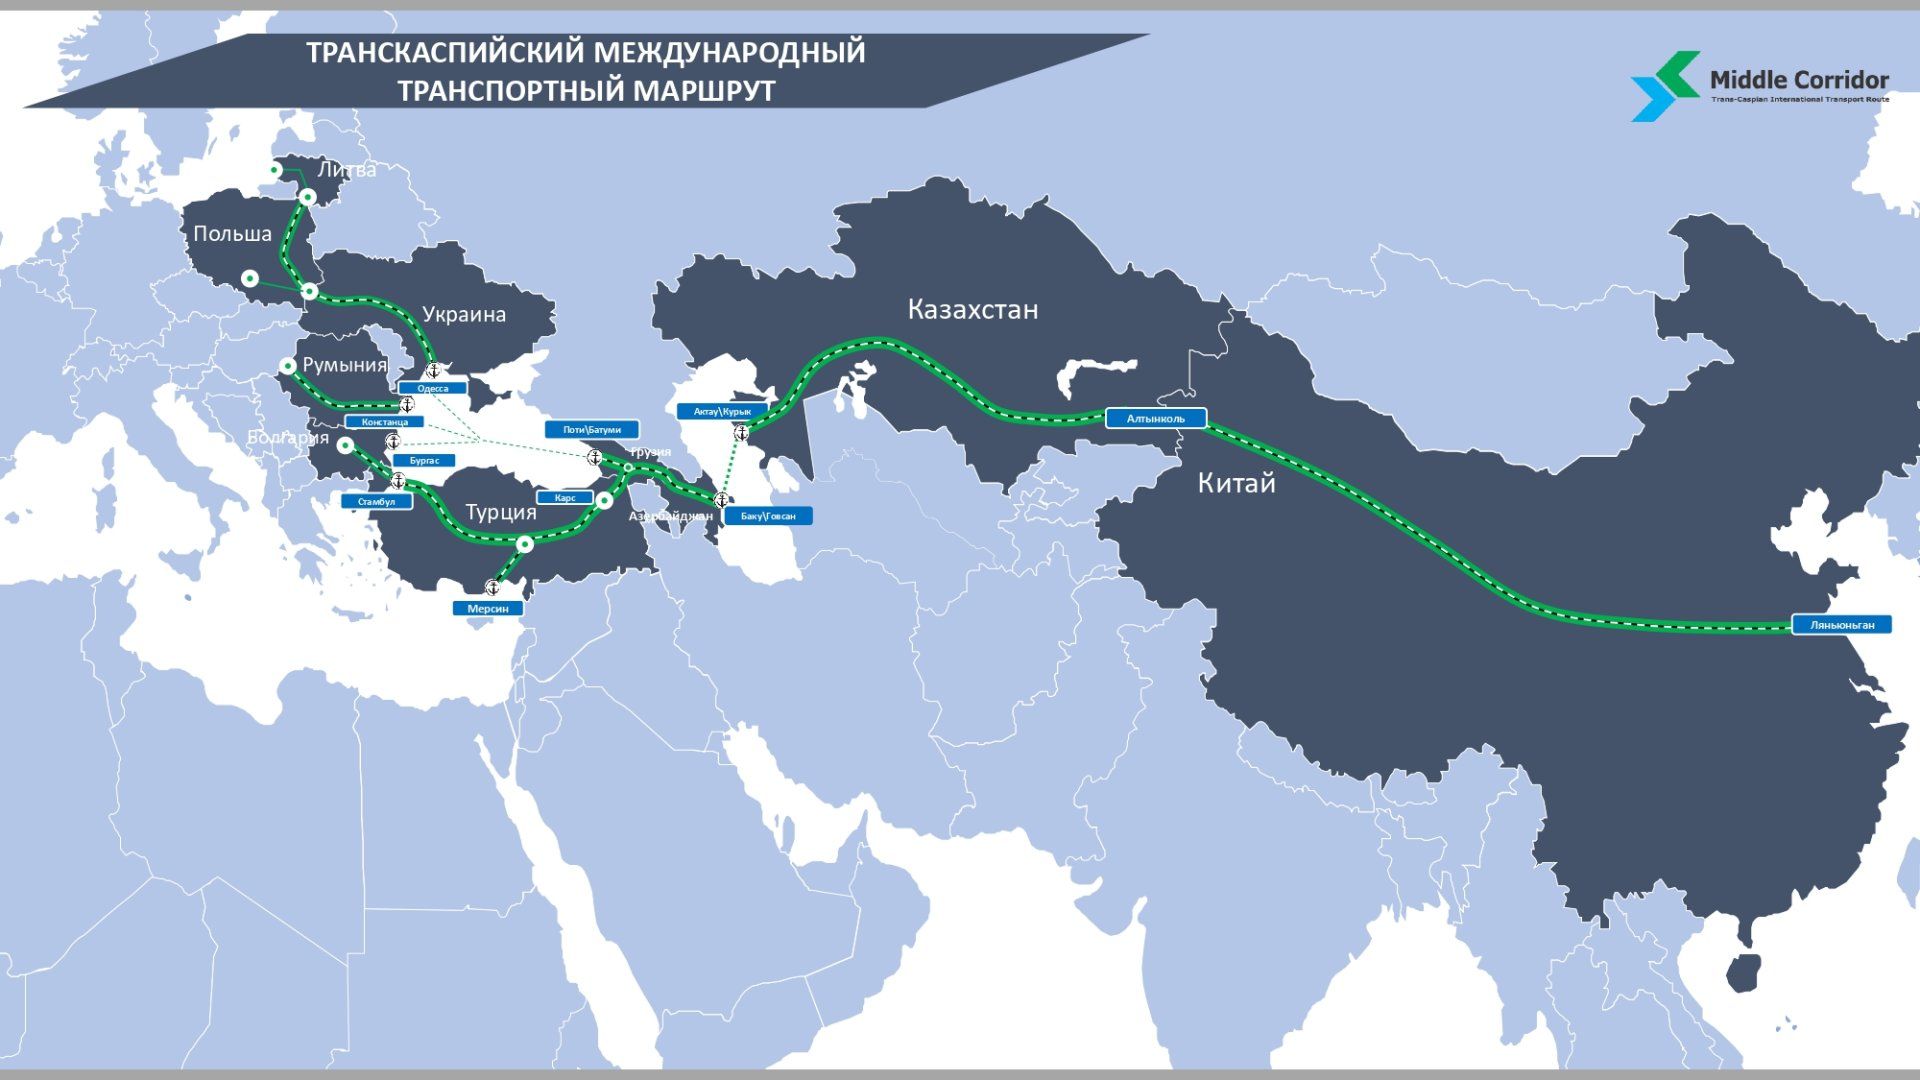 Azerbaijan as significant segment of Middle Corridor in terms of Europe's access to Chinese market